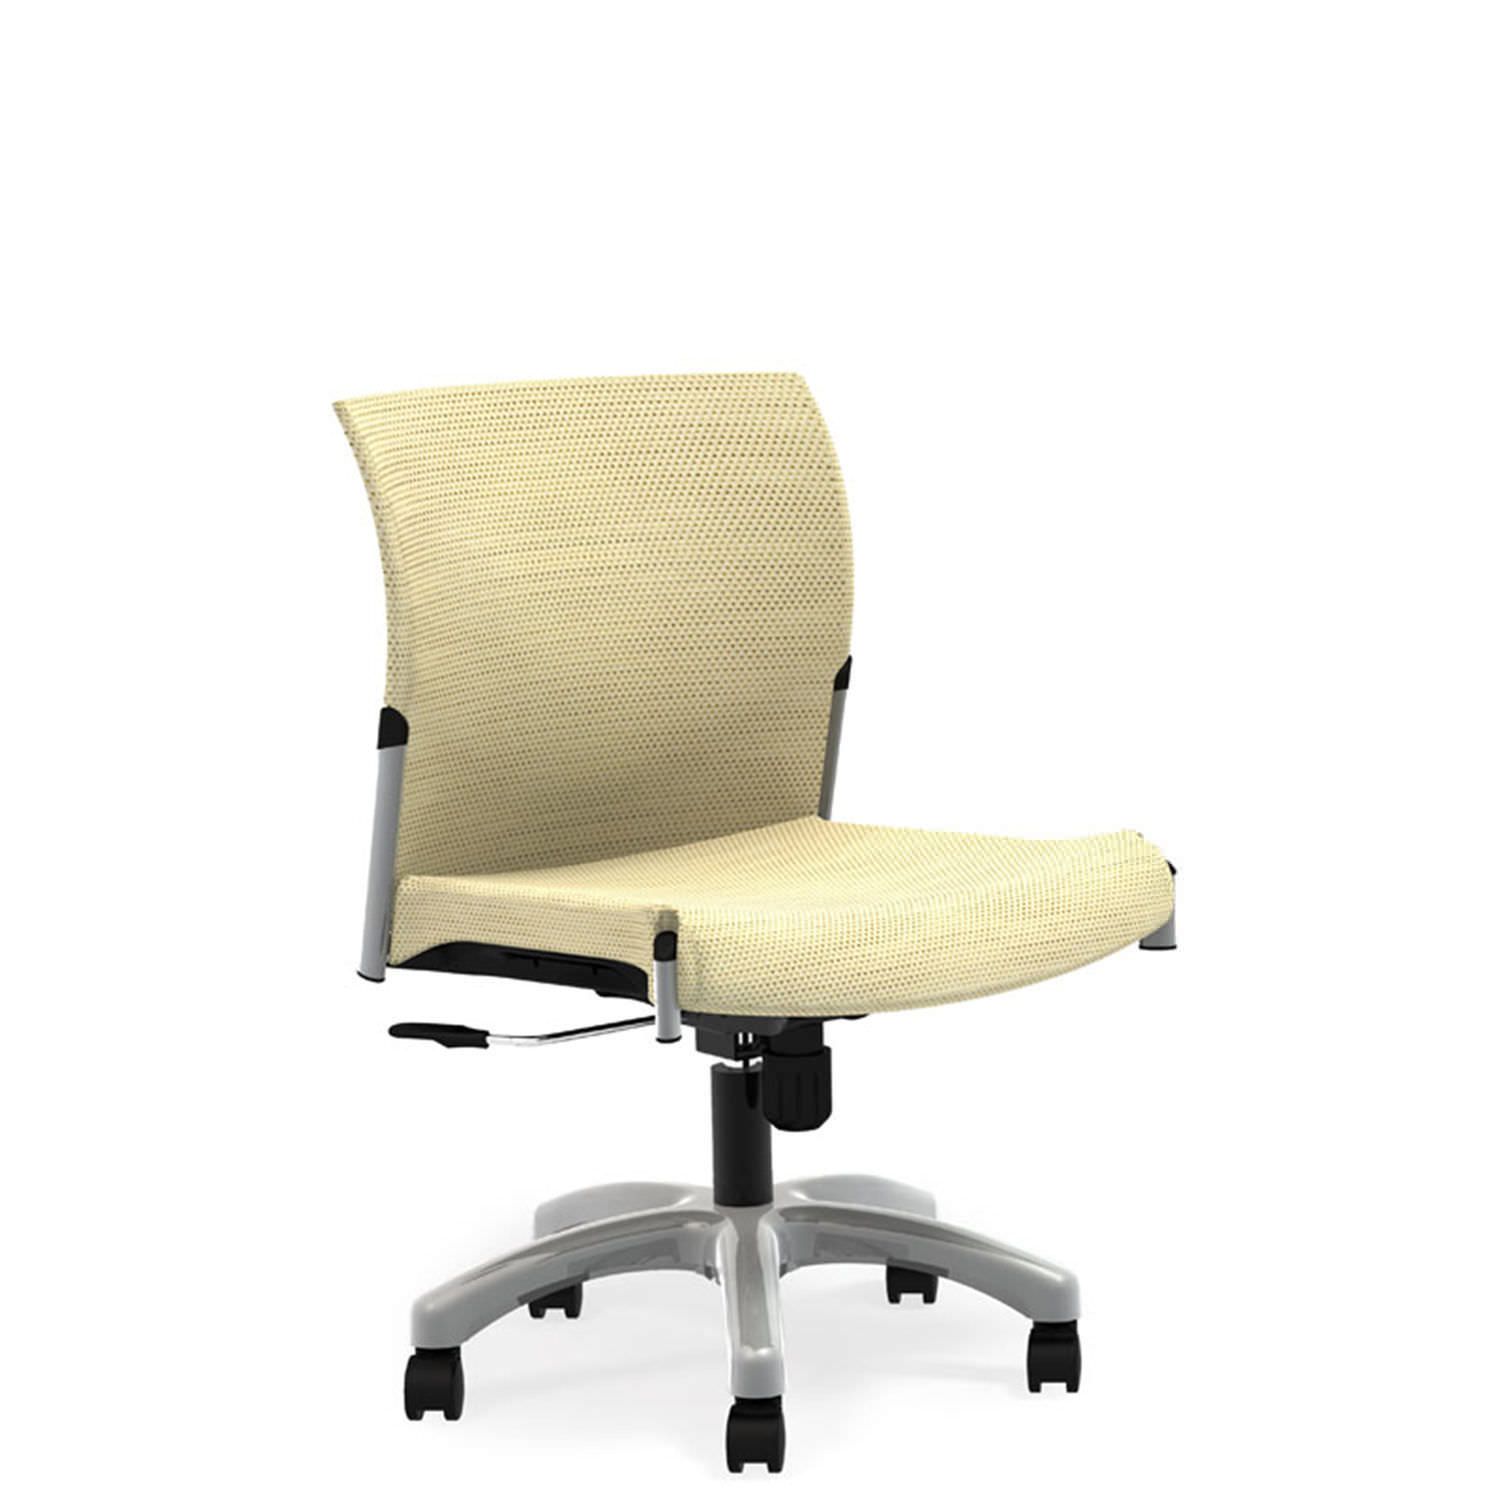 Office chair / on casters / pneumatic / height-adjustable Conceive CO15, Conceive CO16 La-Z-Boy Contract Furniture